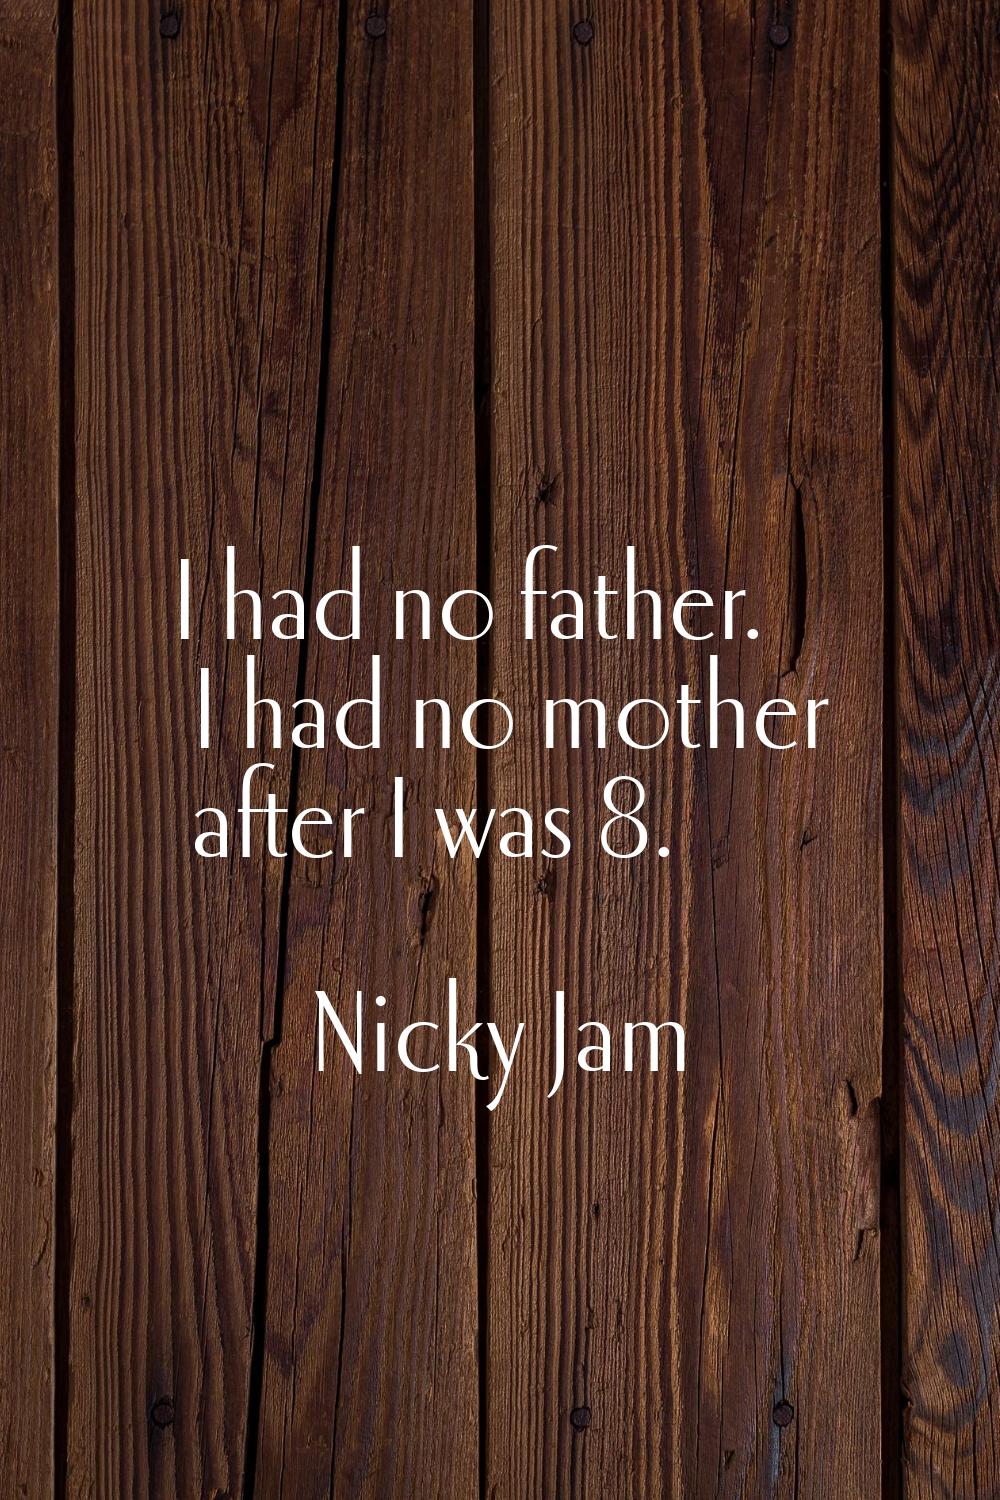 I had no father. I had no mother after I was 8.